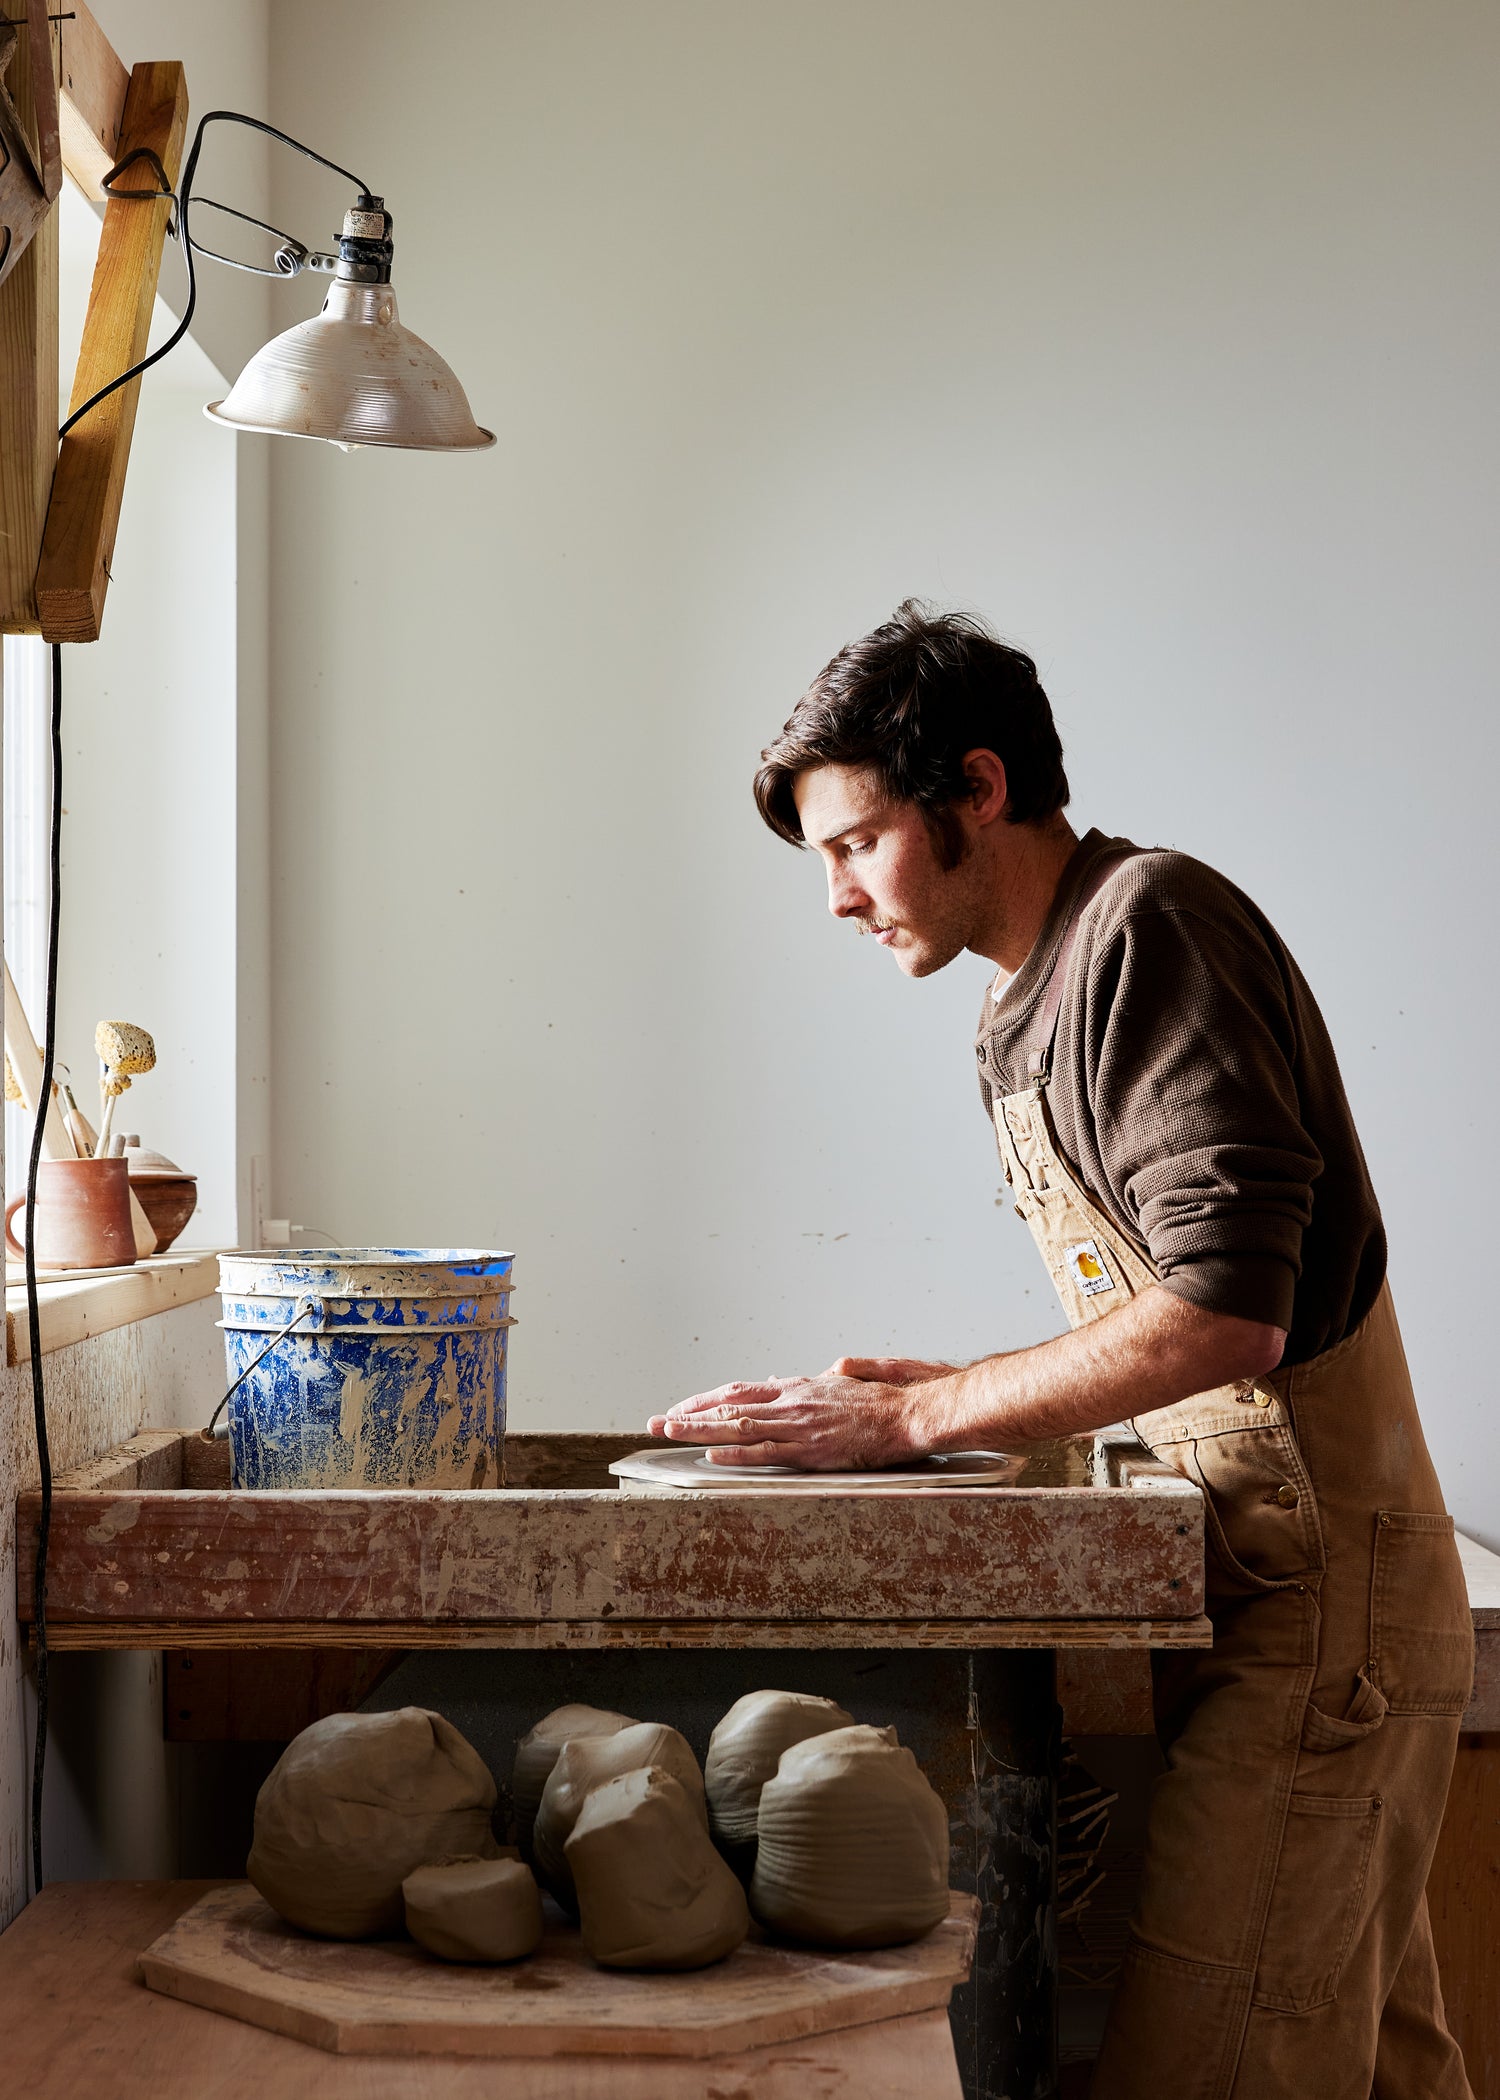 Brad Lail, founder and owner of LAIL Design, based in Catskill, New York. Handmade ceramics and stoneware to last a lifetime